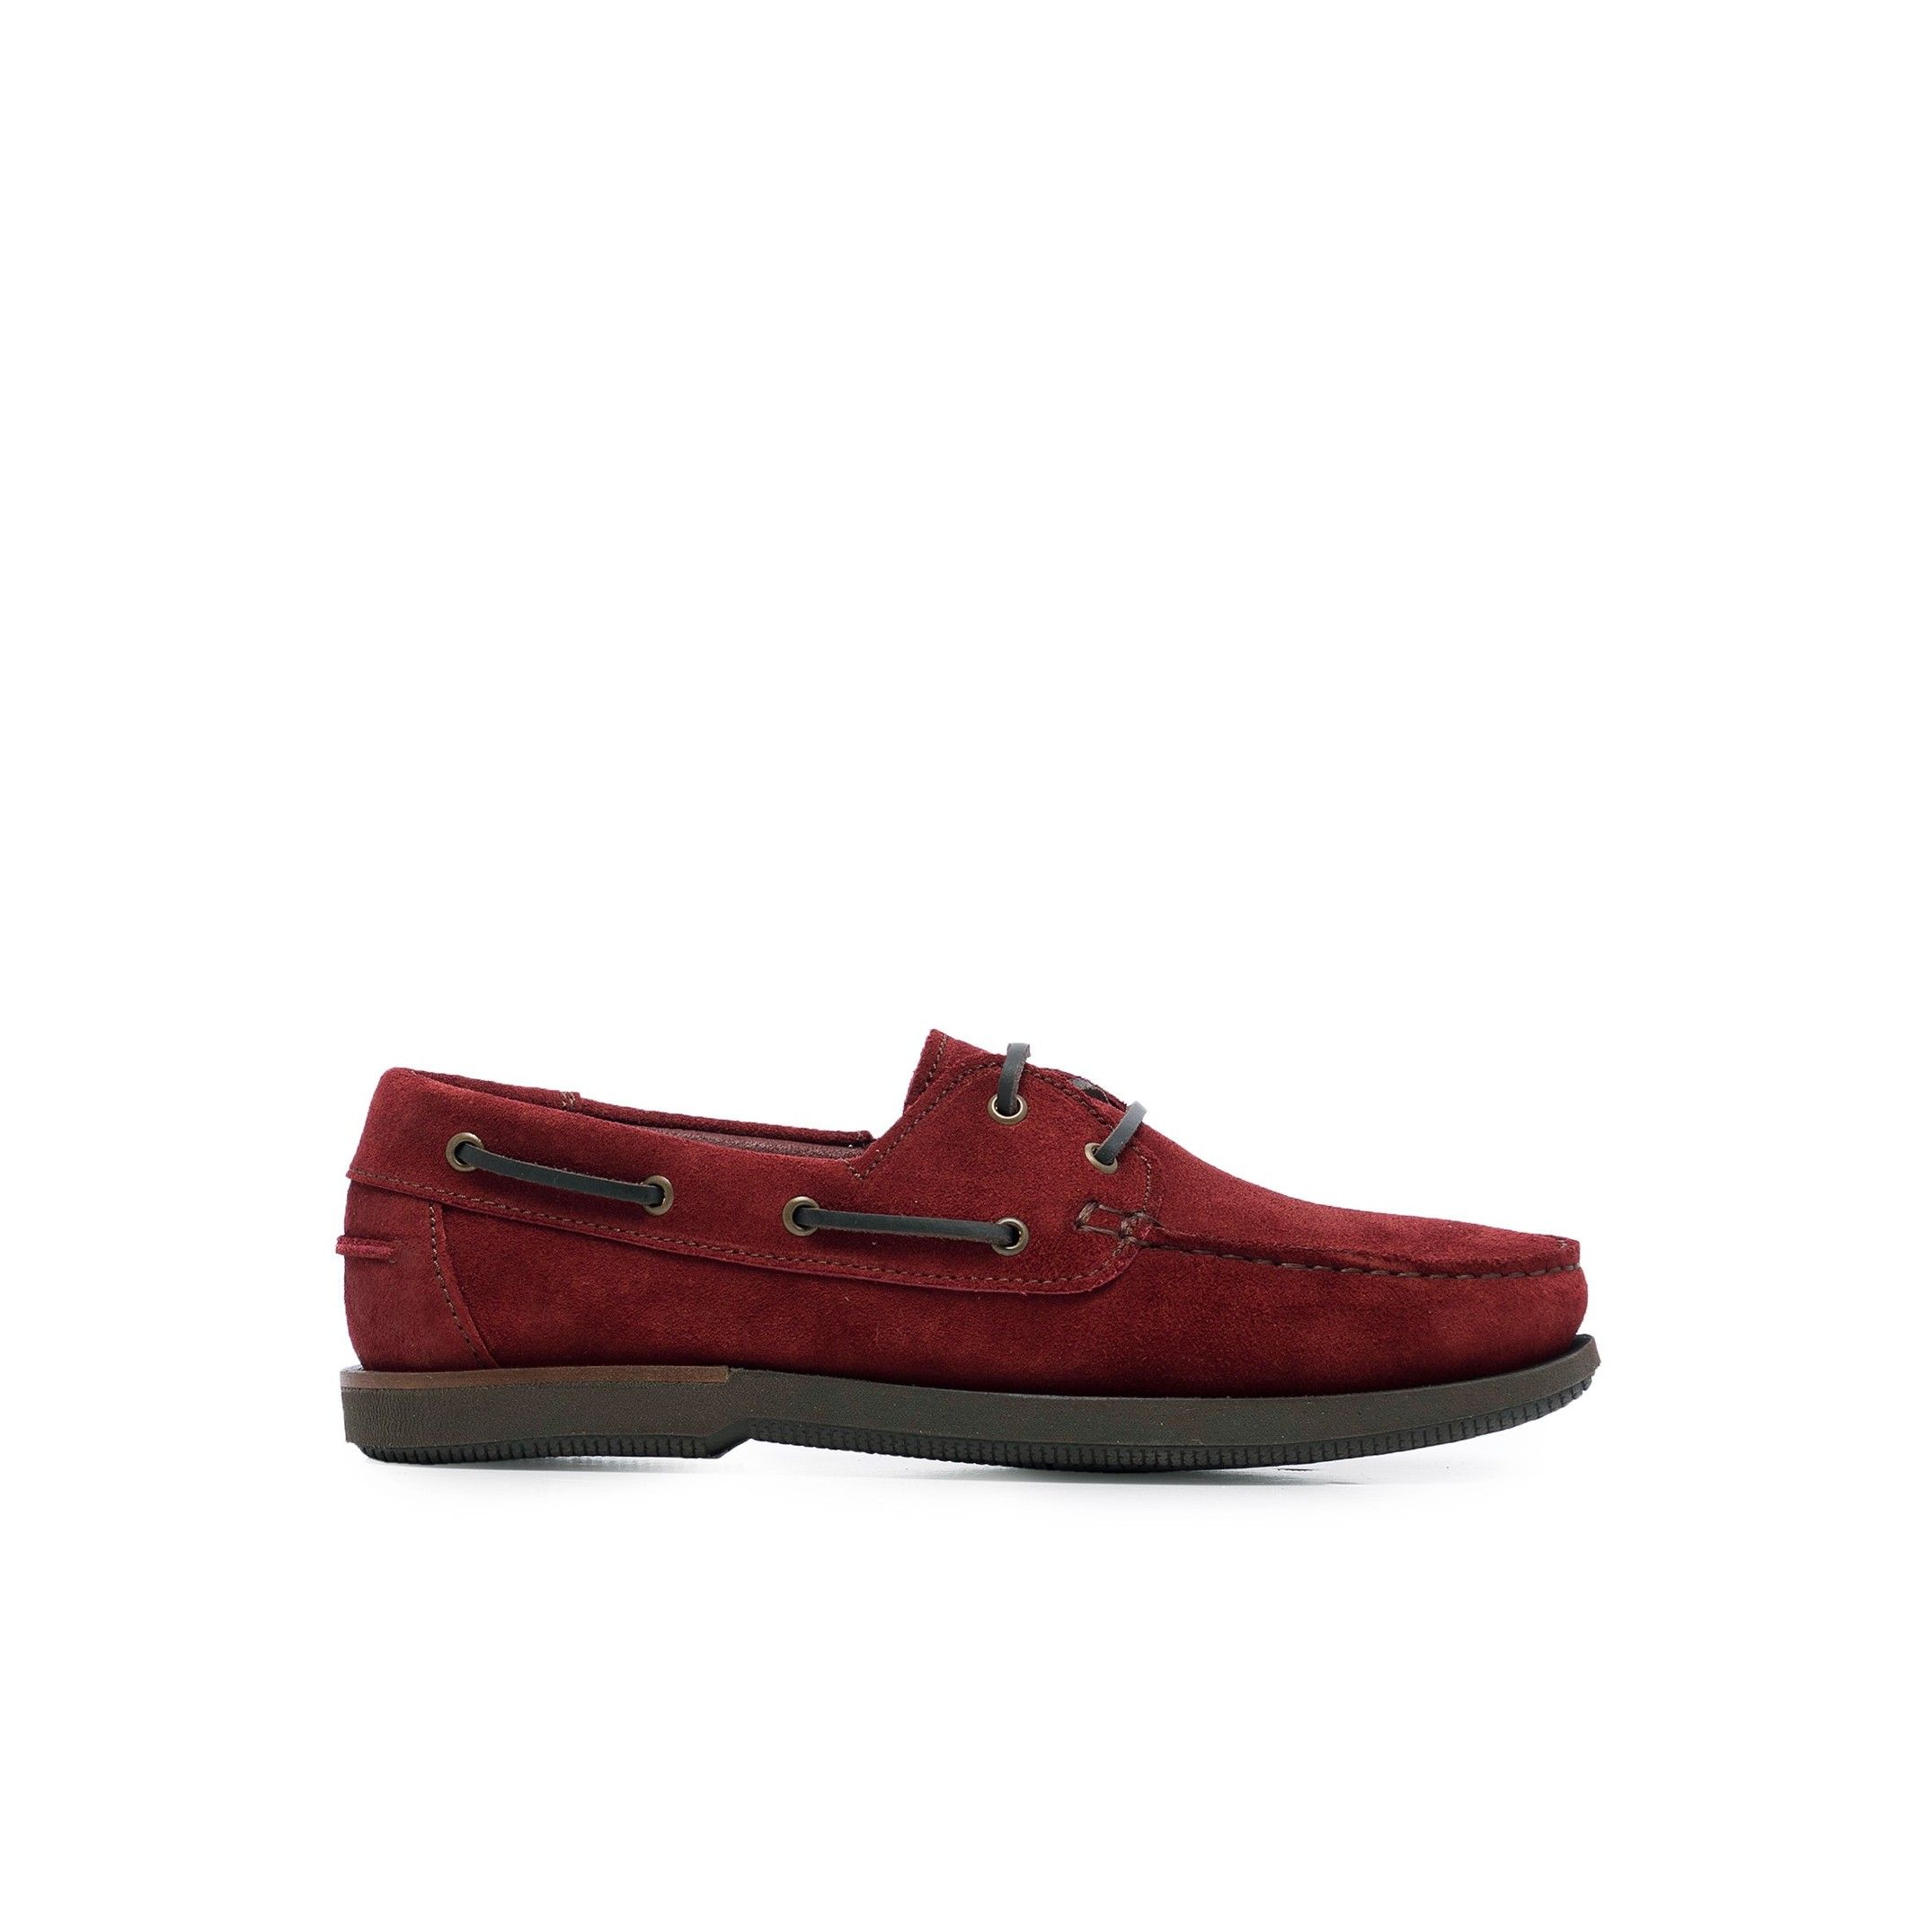 Split Leather boat shoes by Son Castellanisimos. Upper made of cowhide leather. Leather laces closure. Inner and insole made of cowhide leather. Sole material: synthetic and non slip. Heel height; 1'5 cm. Designed and made in Spain.